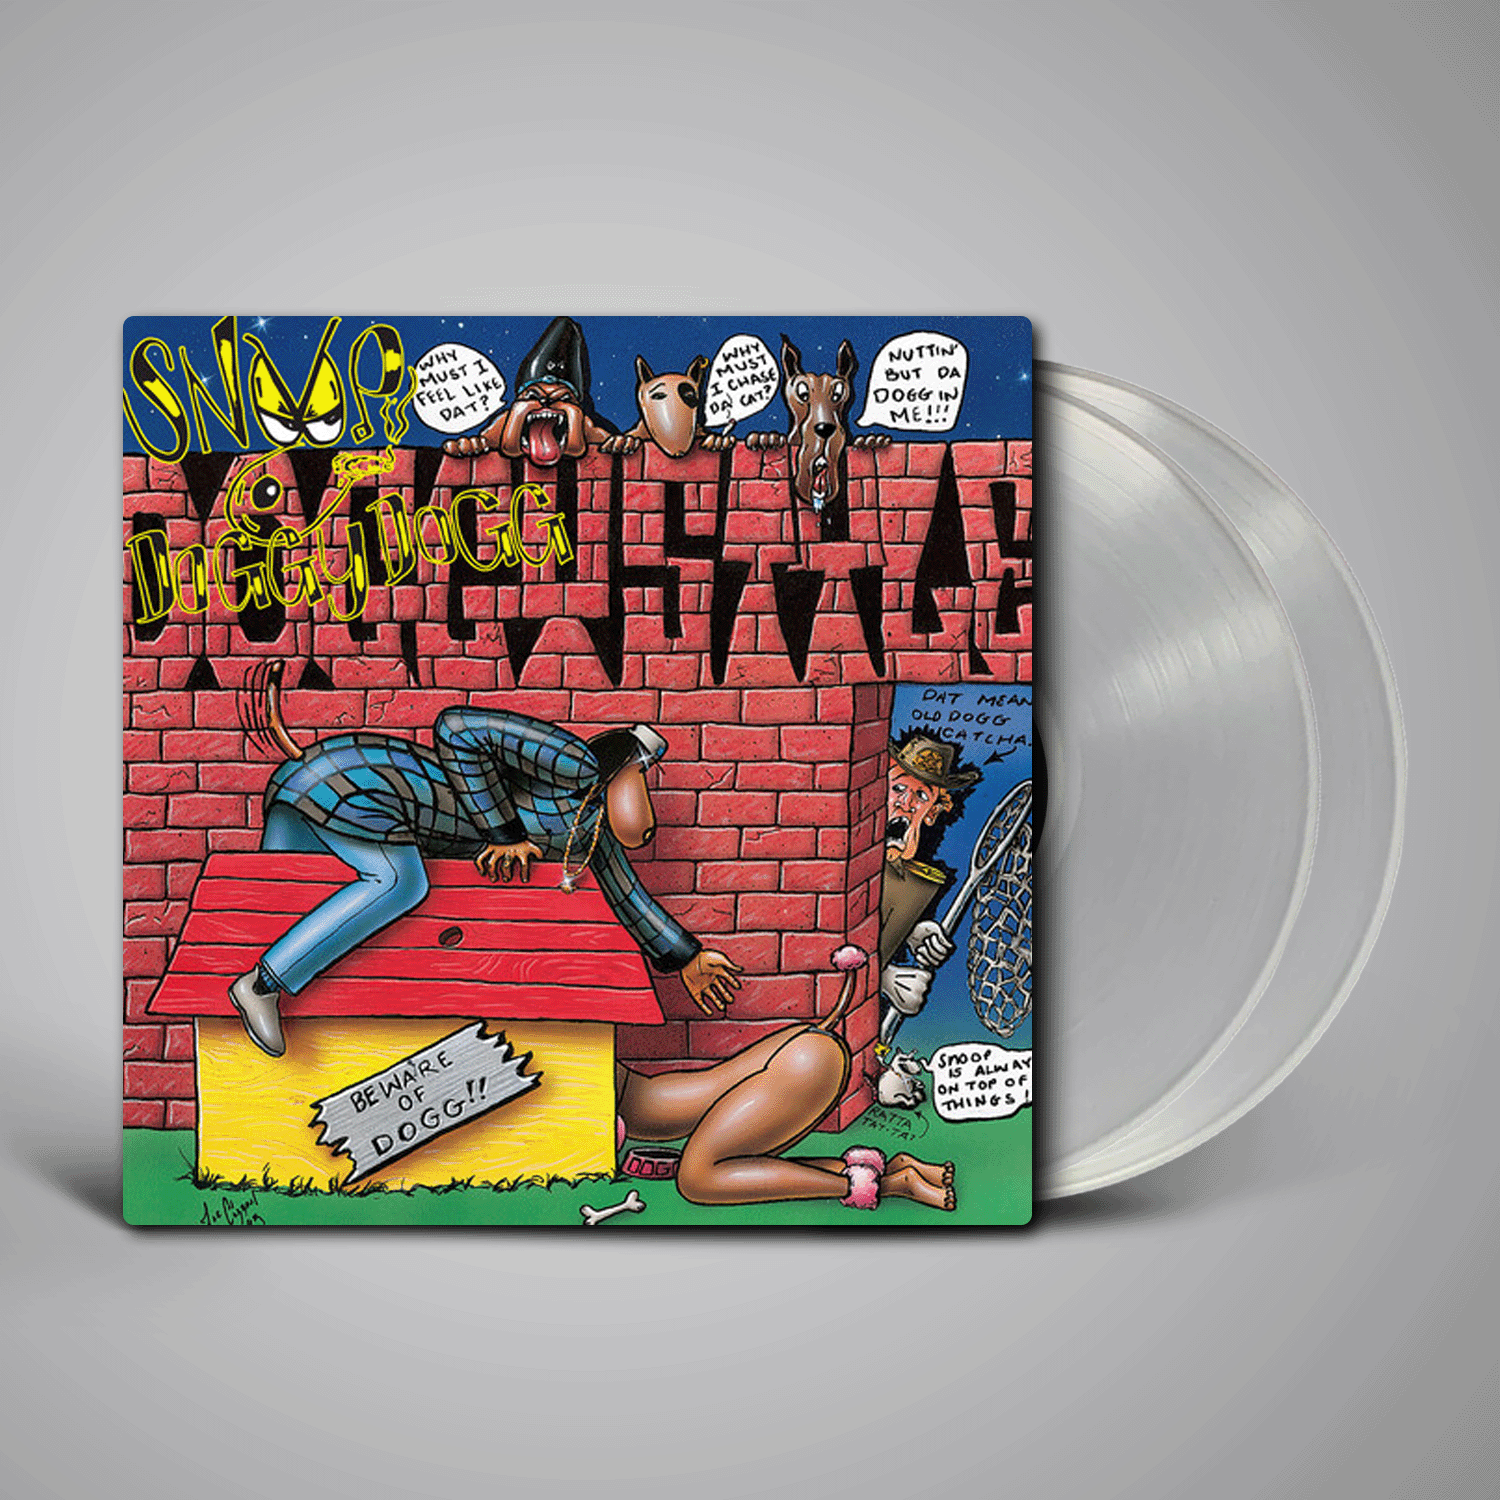 Snoop Doggy Dogg - Doggystyle (30th Anniversary) – Resident Vinyl